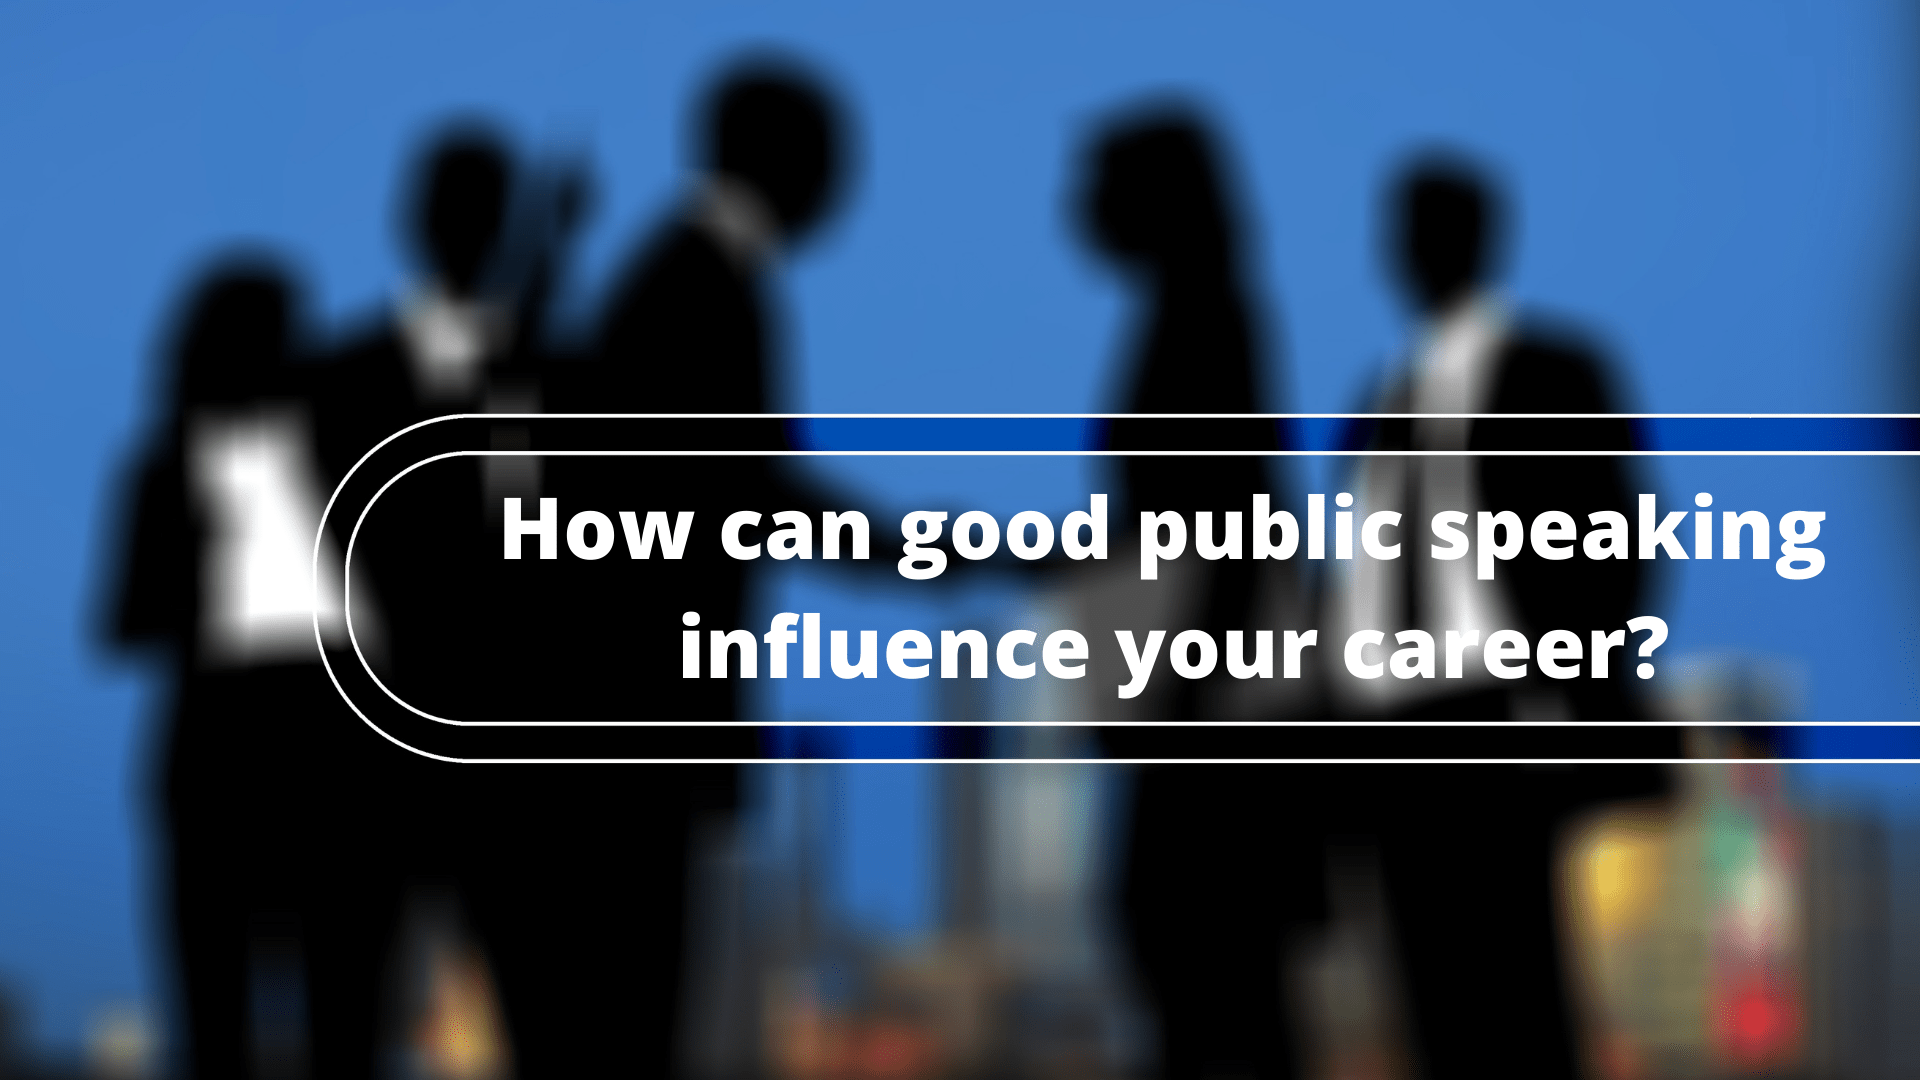 How can good public speaking influence your career?